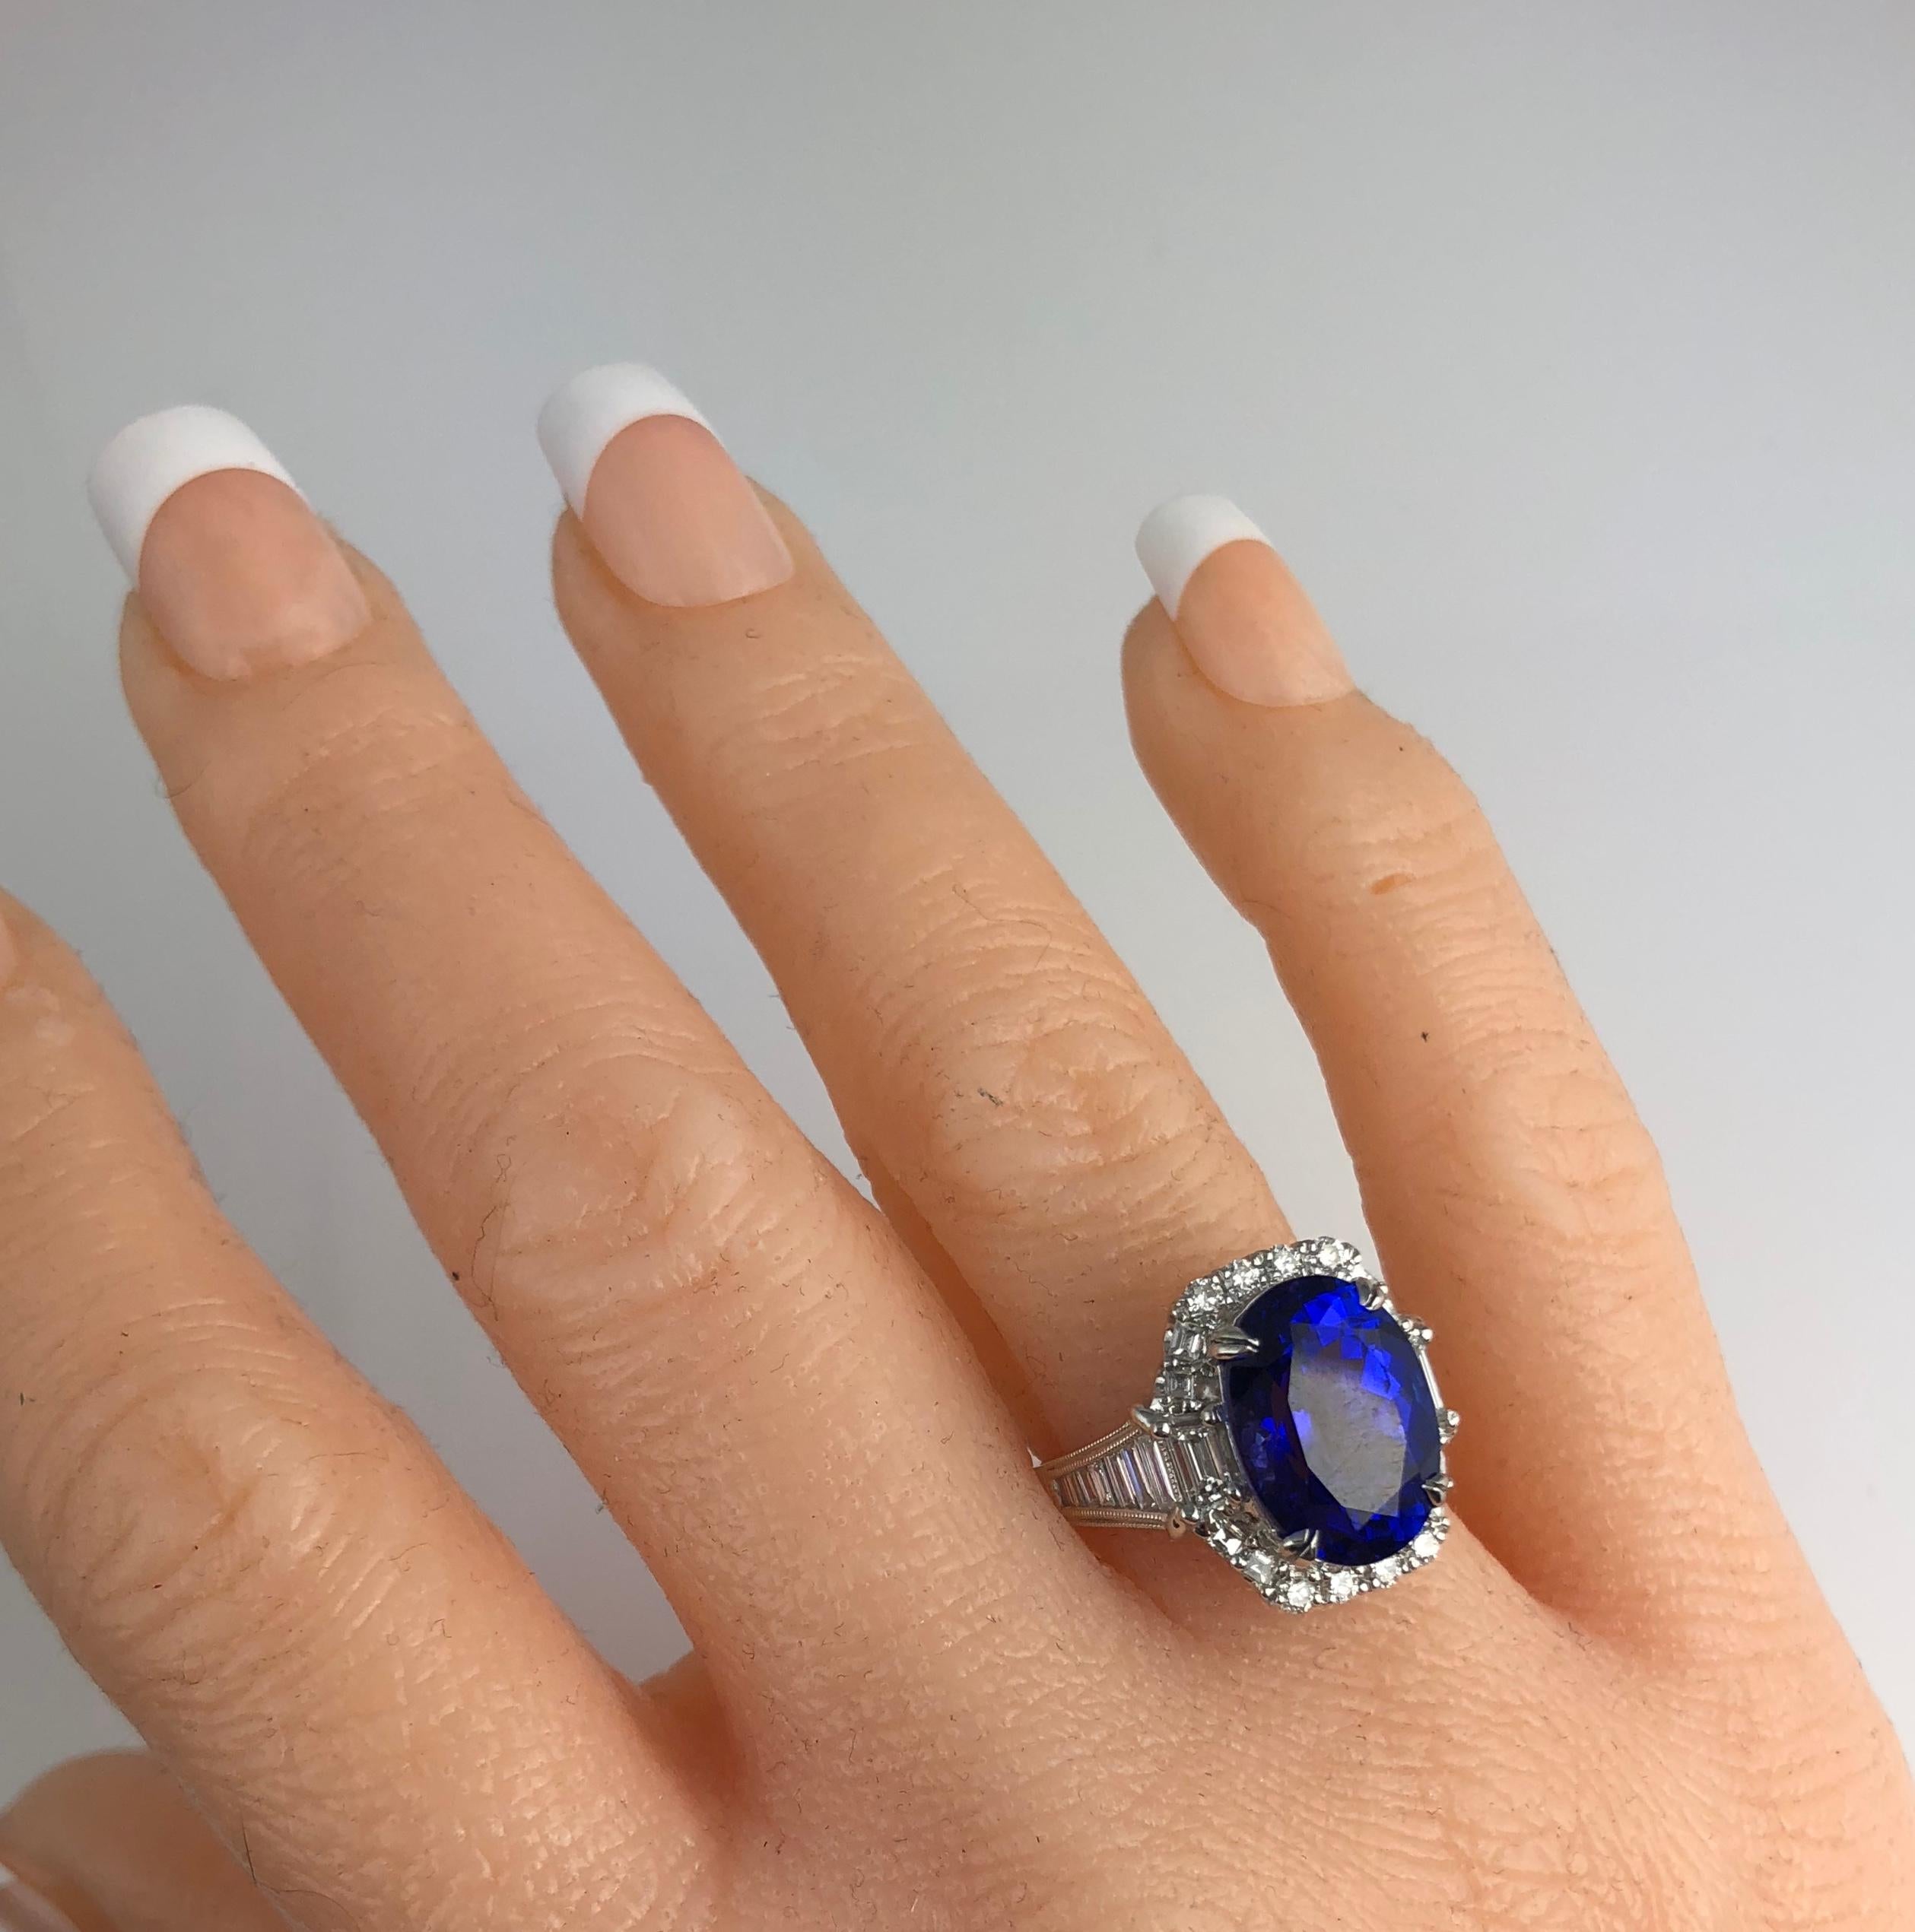 GIA Certified 8.30 Carat Oval Cut Blue-Violet Tanzanite and Diamond Ring ref537 In New Condition For Sale In New York, NY